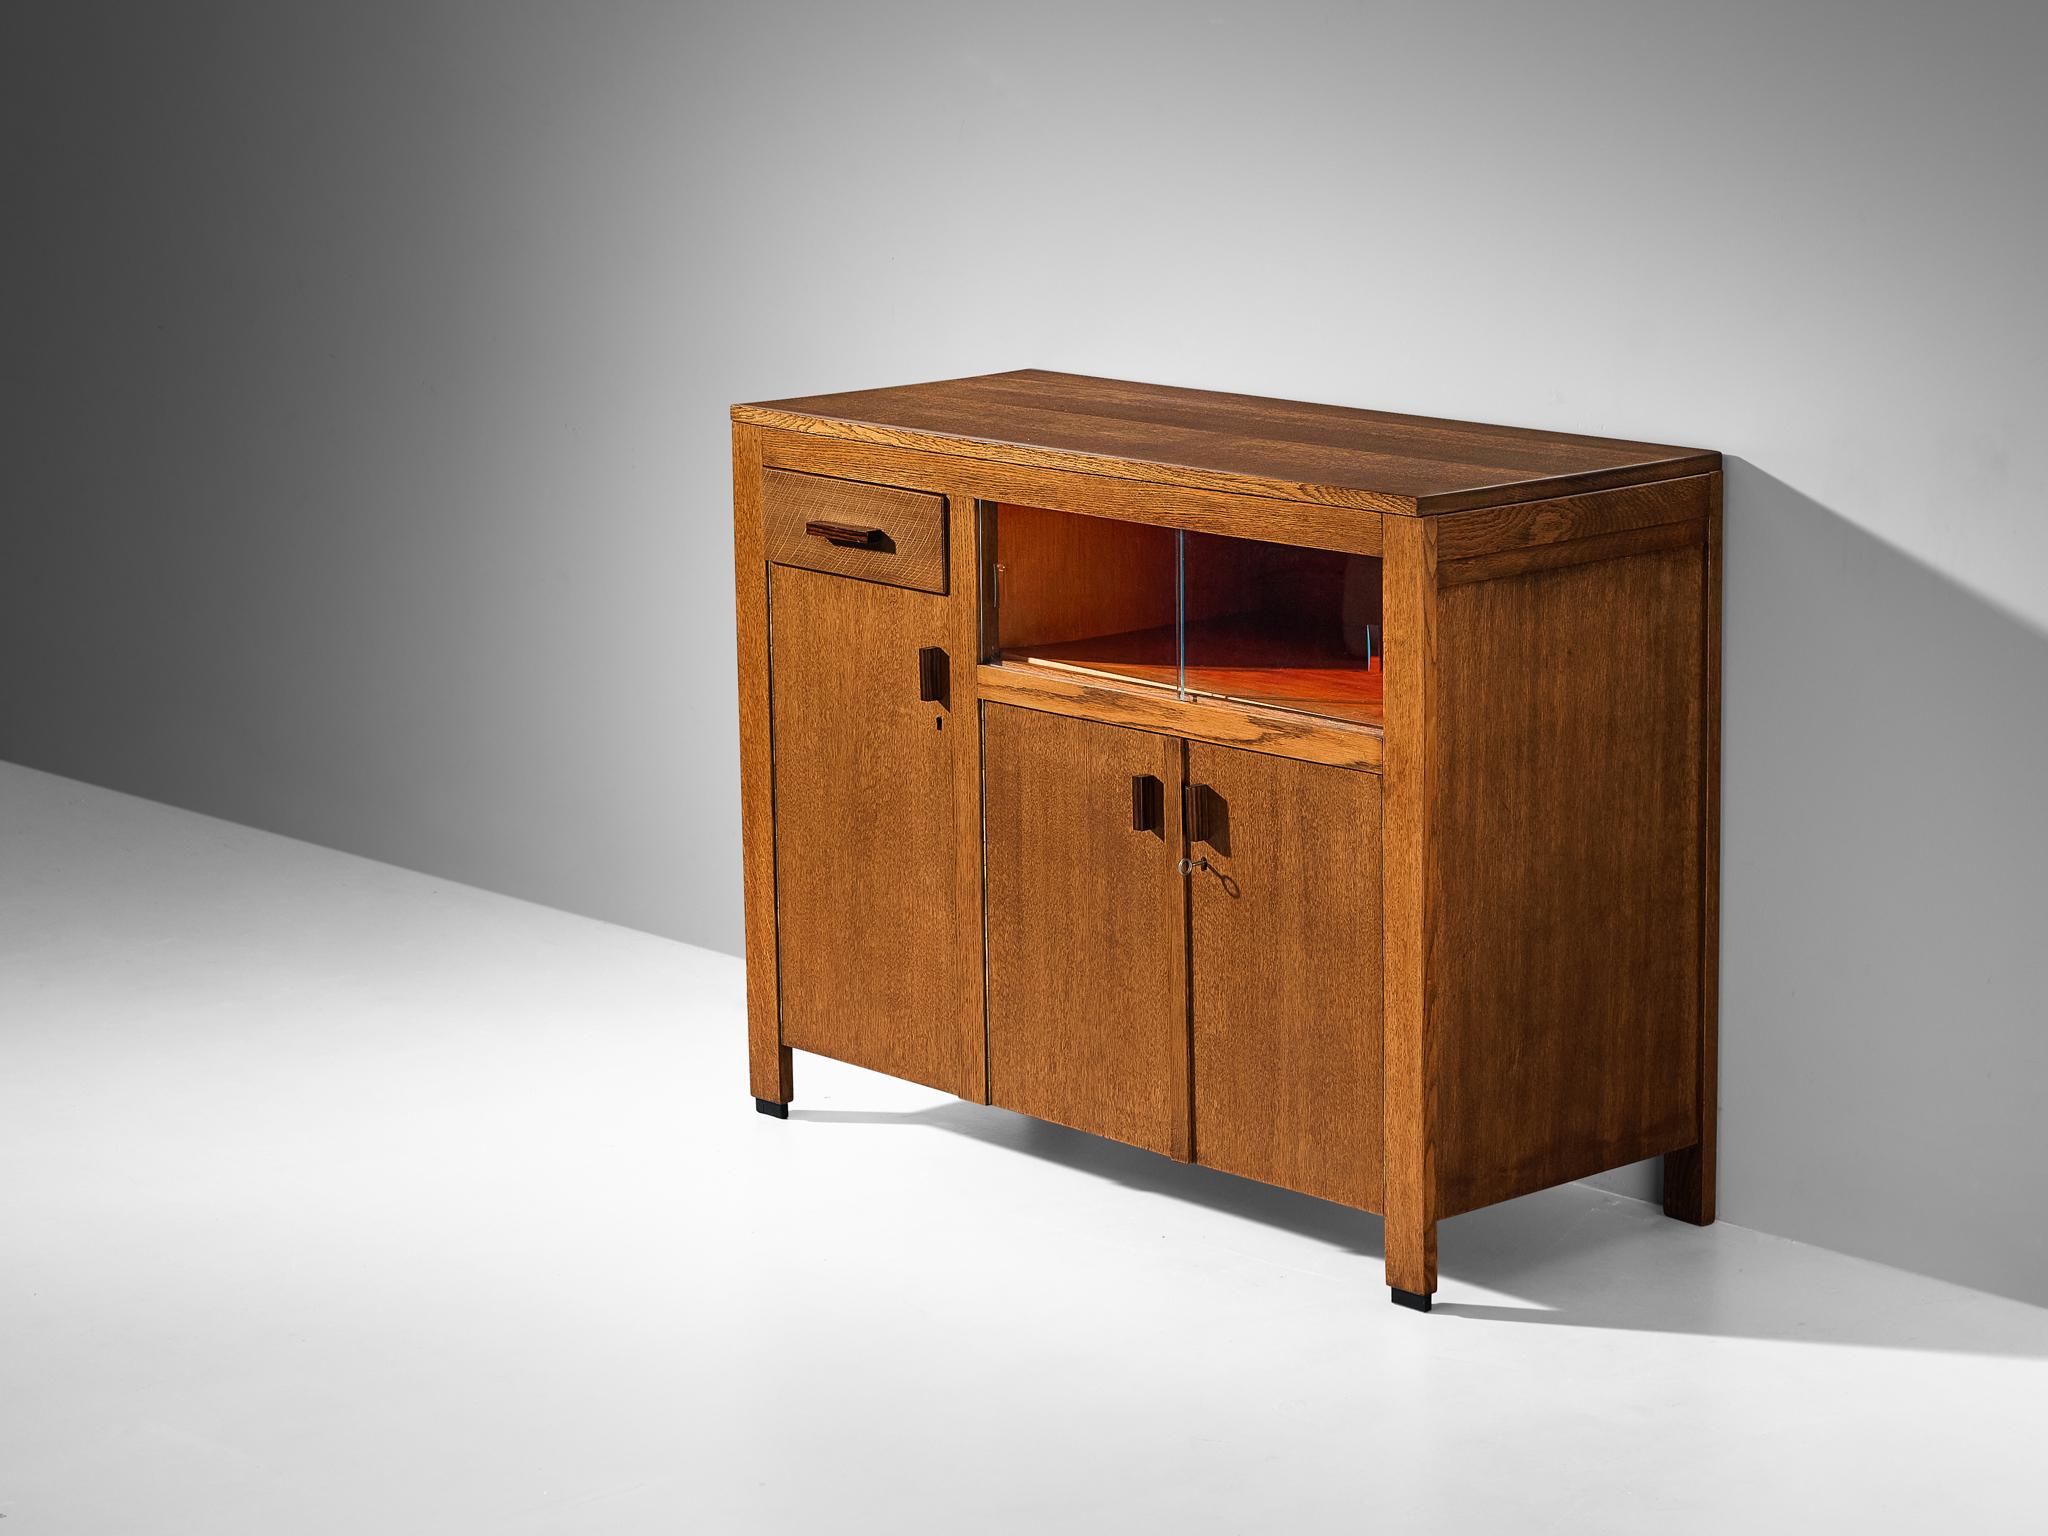 Sideboard, oak, coromandel, glass, The Netherlands, 1930s

Elegant Amsterdamse School sideboard with a modest design defined by characteristic elements that impart the piece with a unique appearance. The sideboard is equipped with three asymmetrical